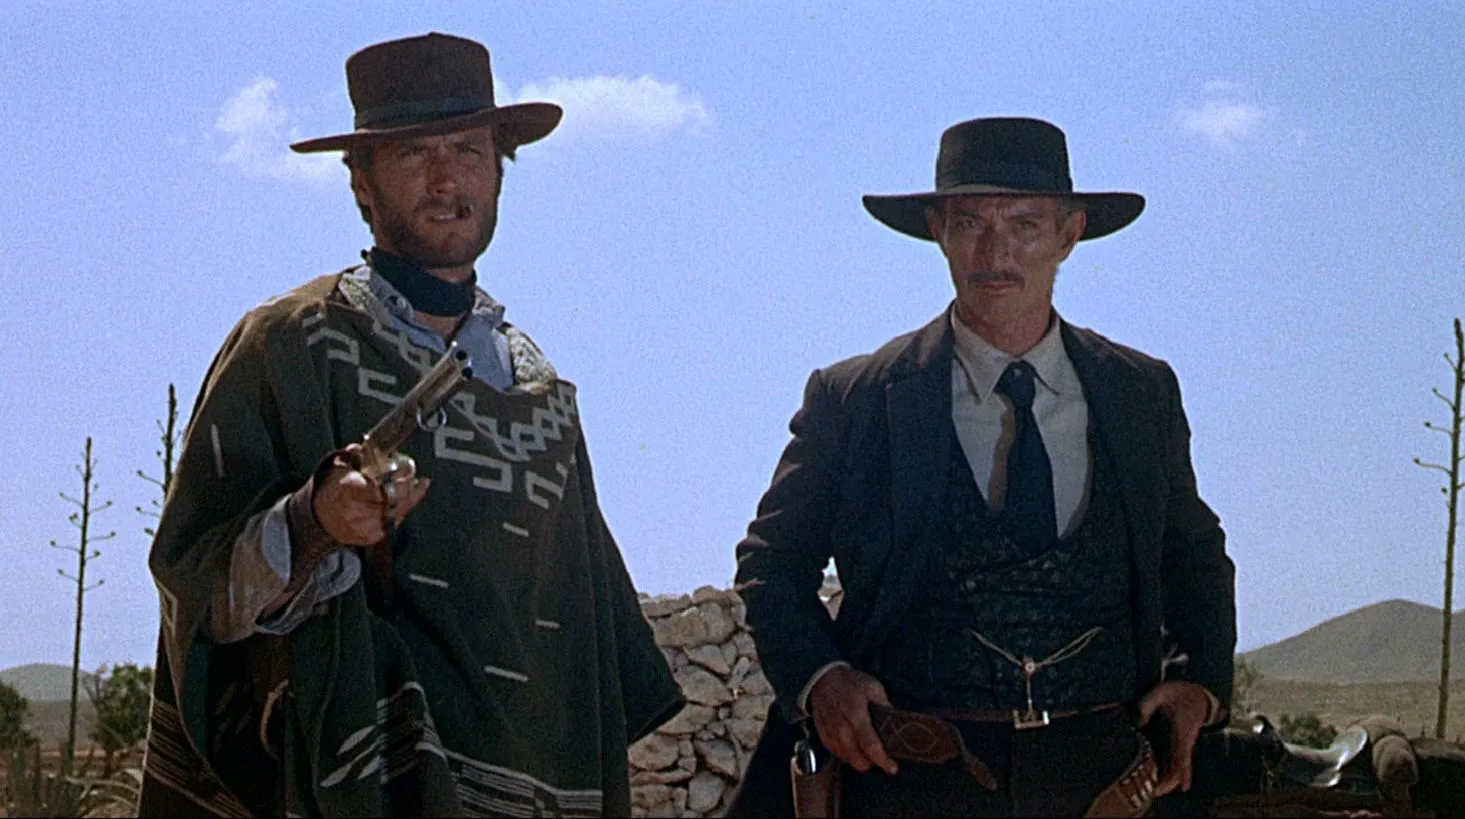 Timeless Western: “For a Few Dollars More” (1965)